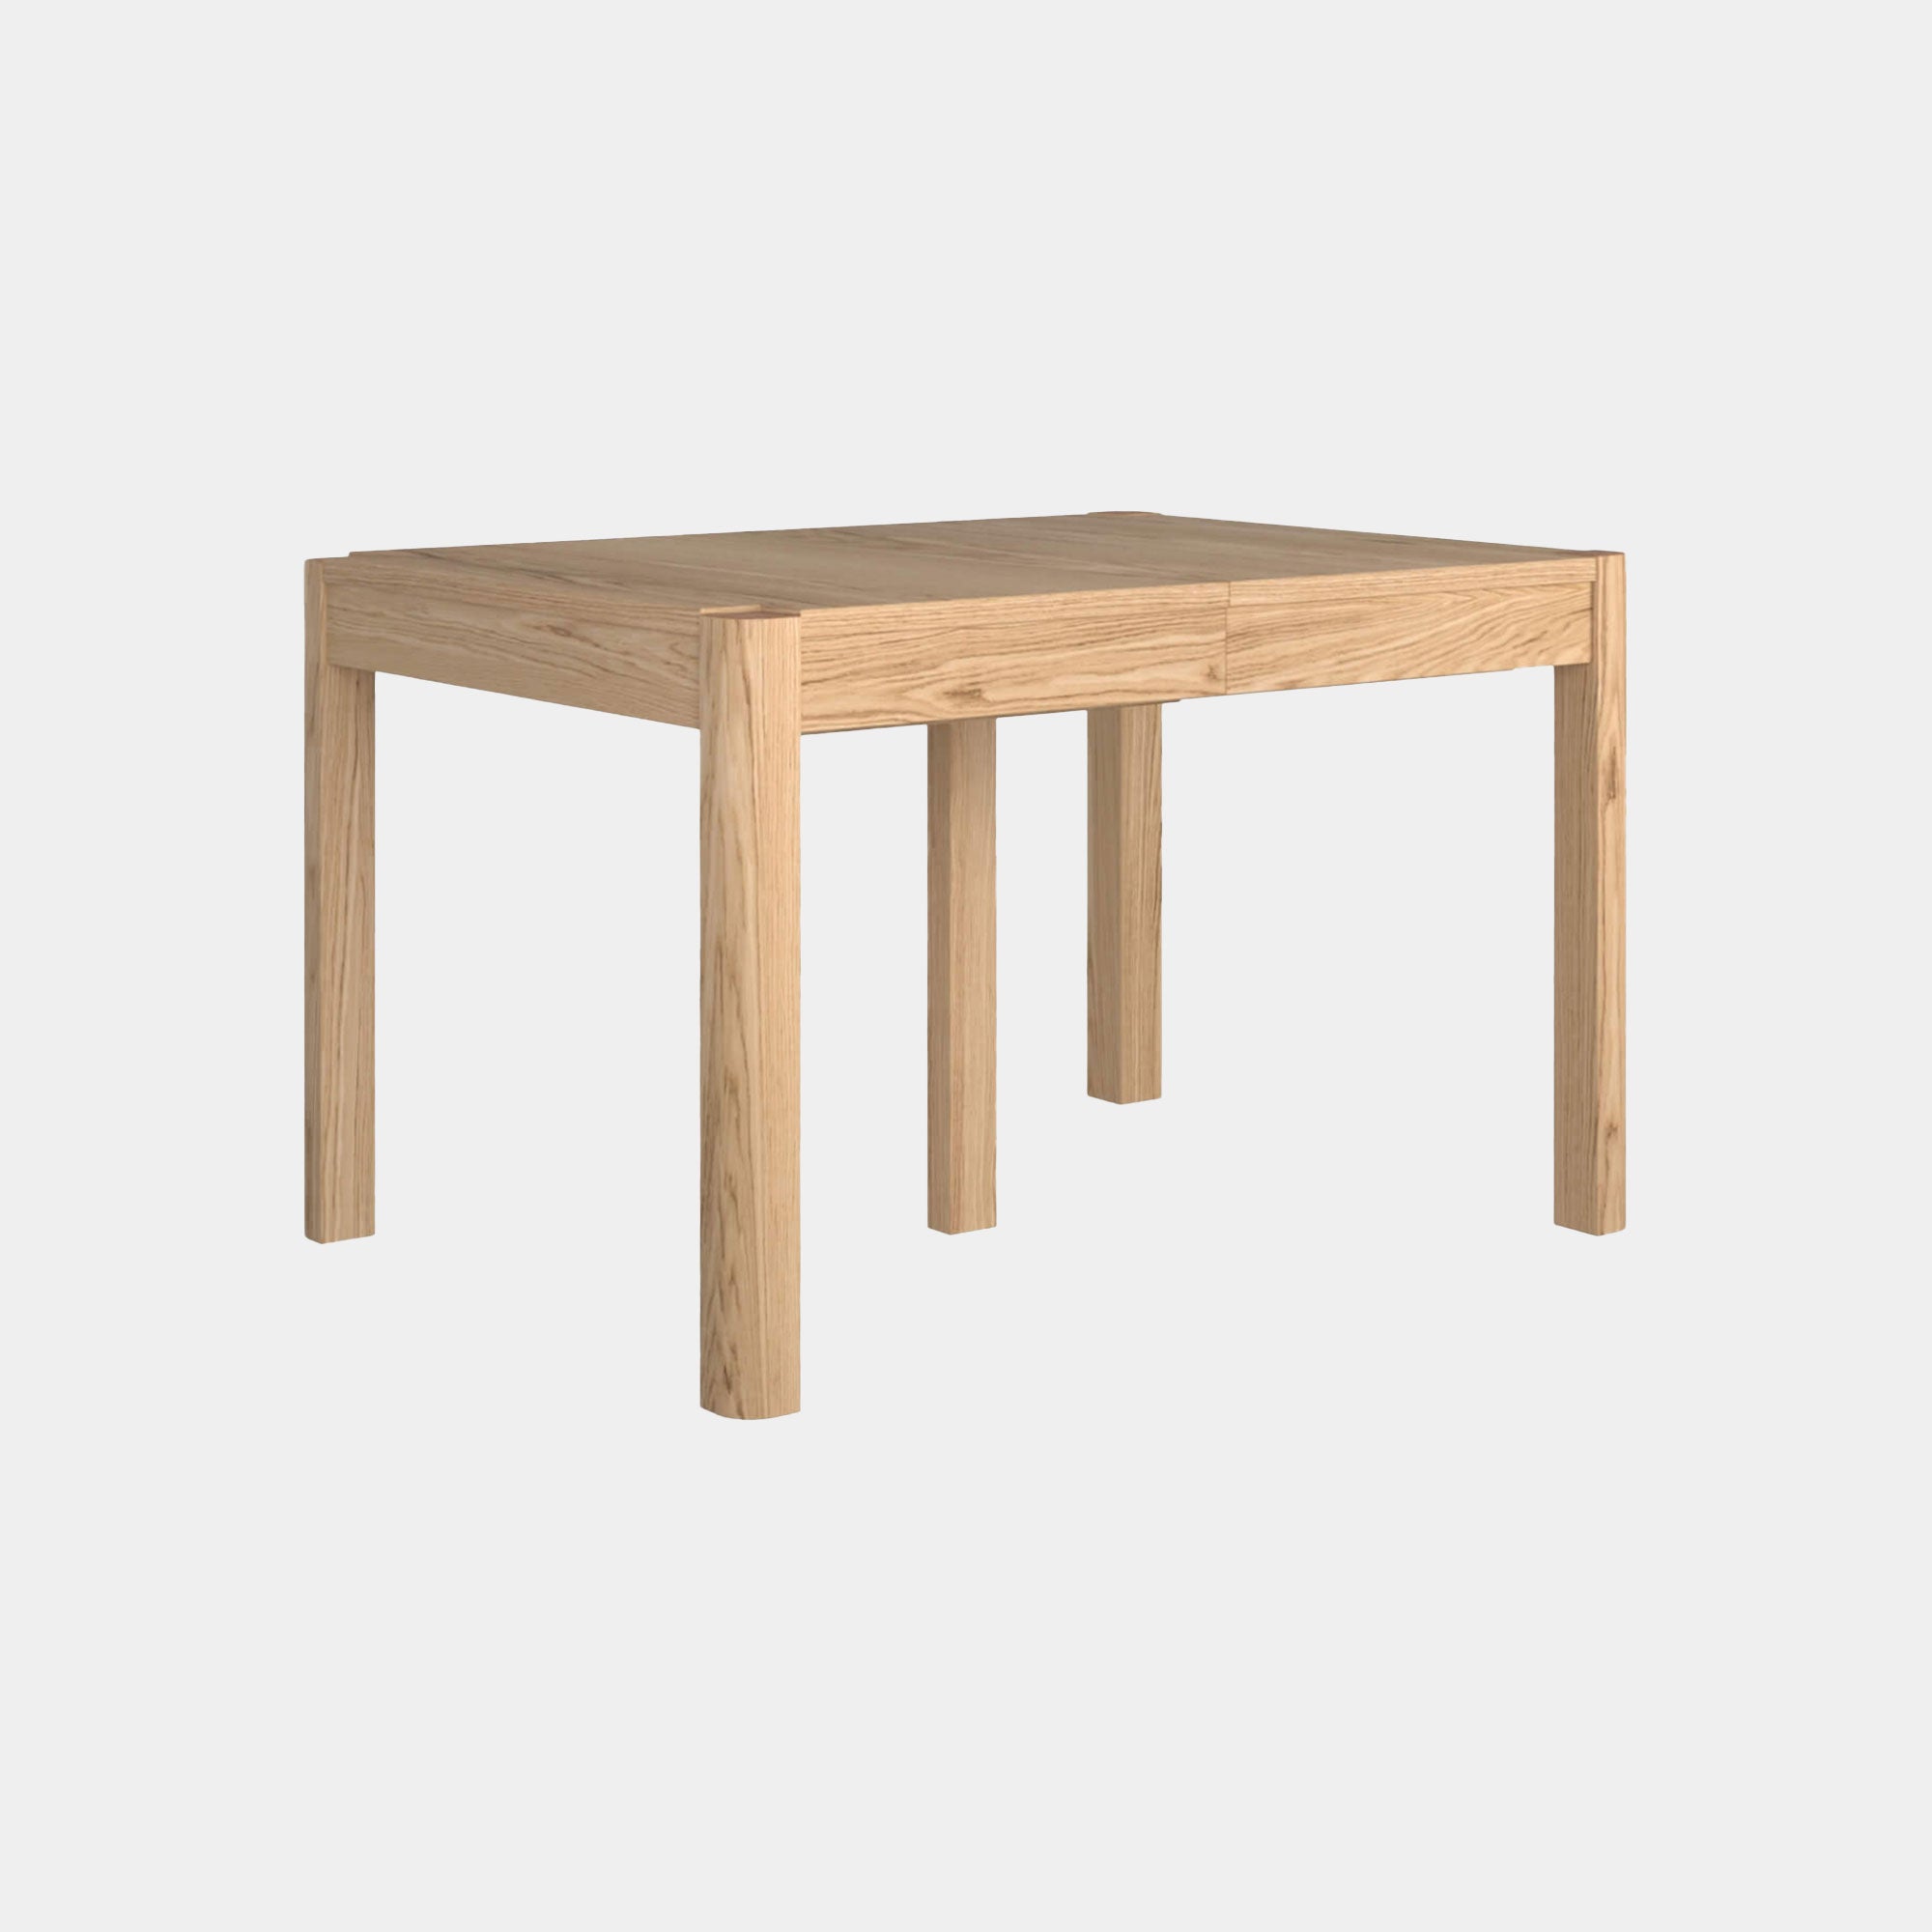 4-8 Seat Extending Dining Table (120-170cm)